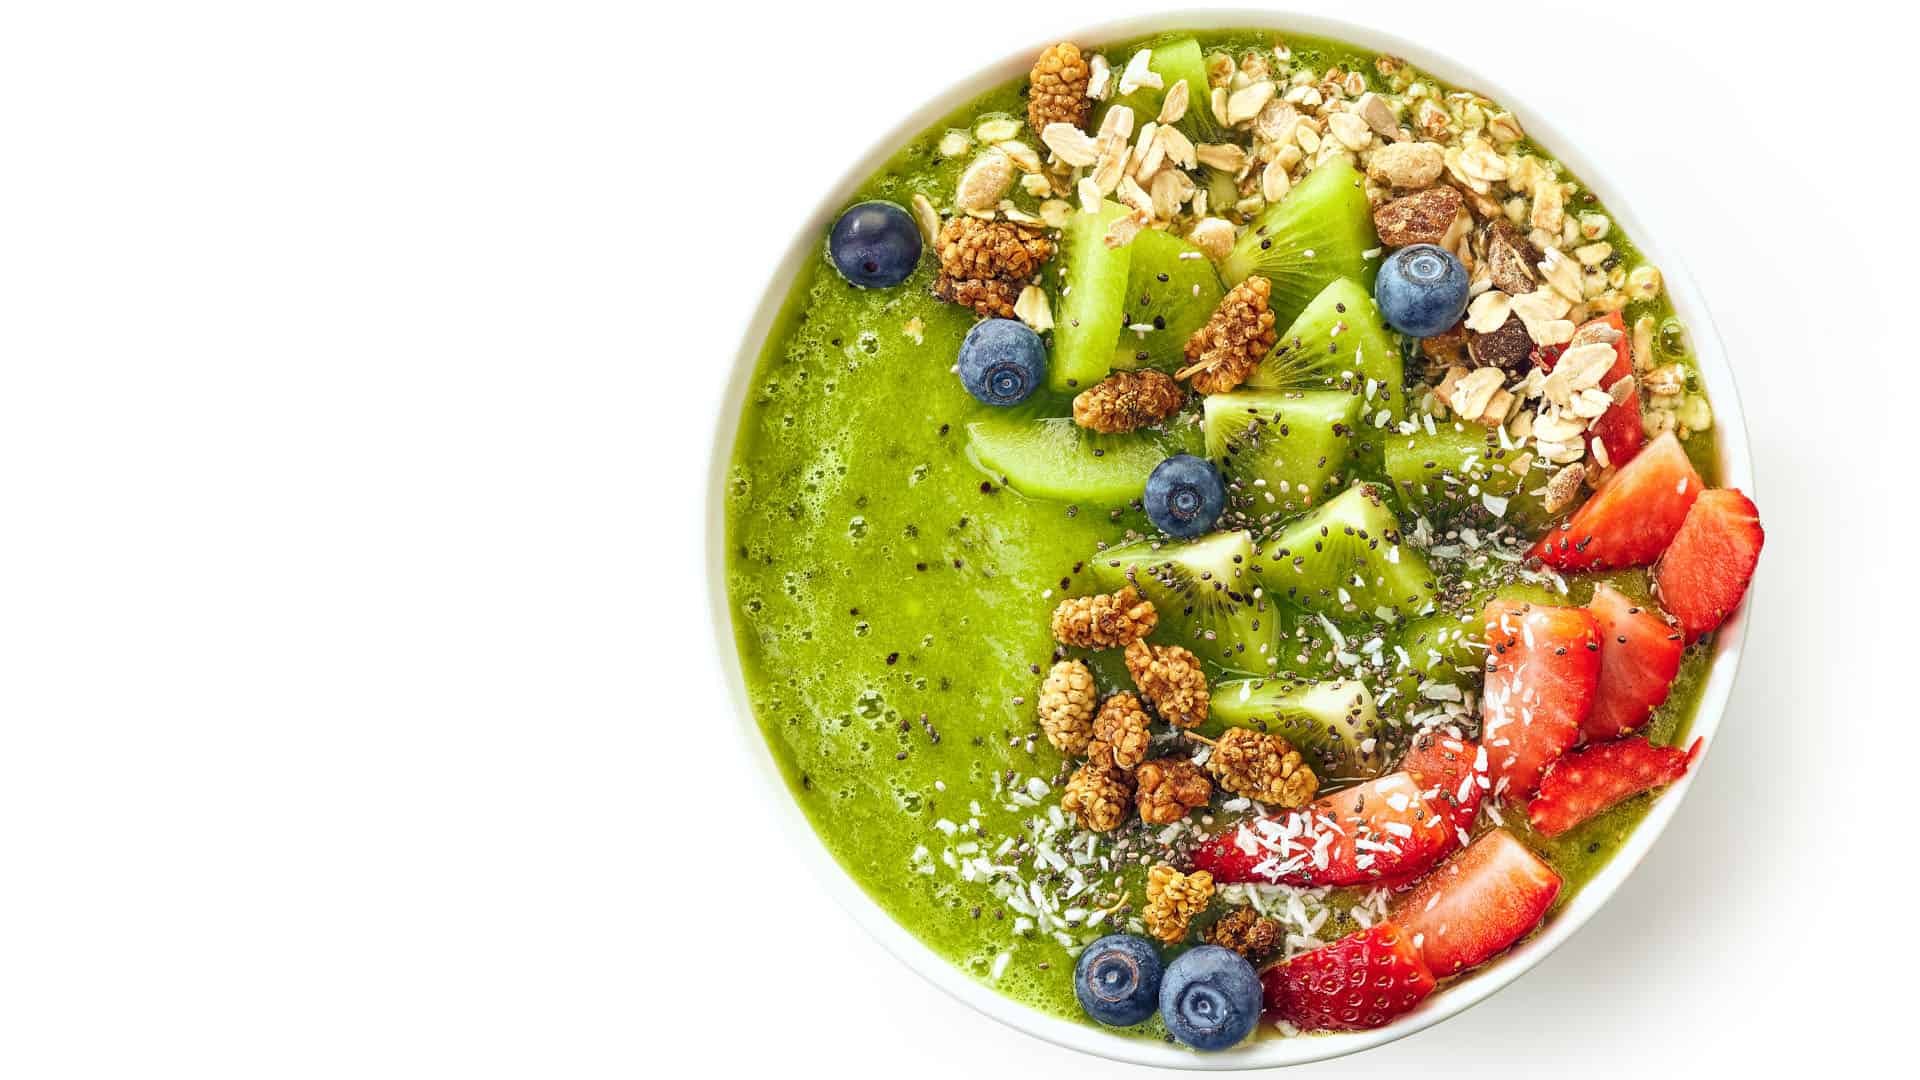 Featured Image for “SuperFood Greens Smoothie Bowl”